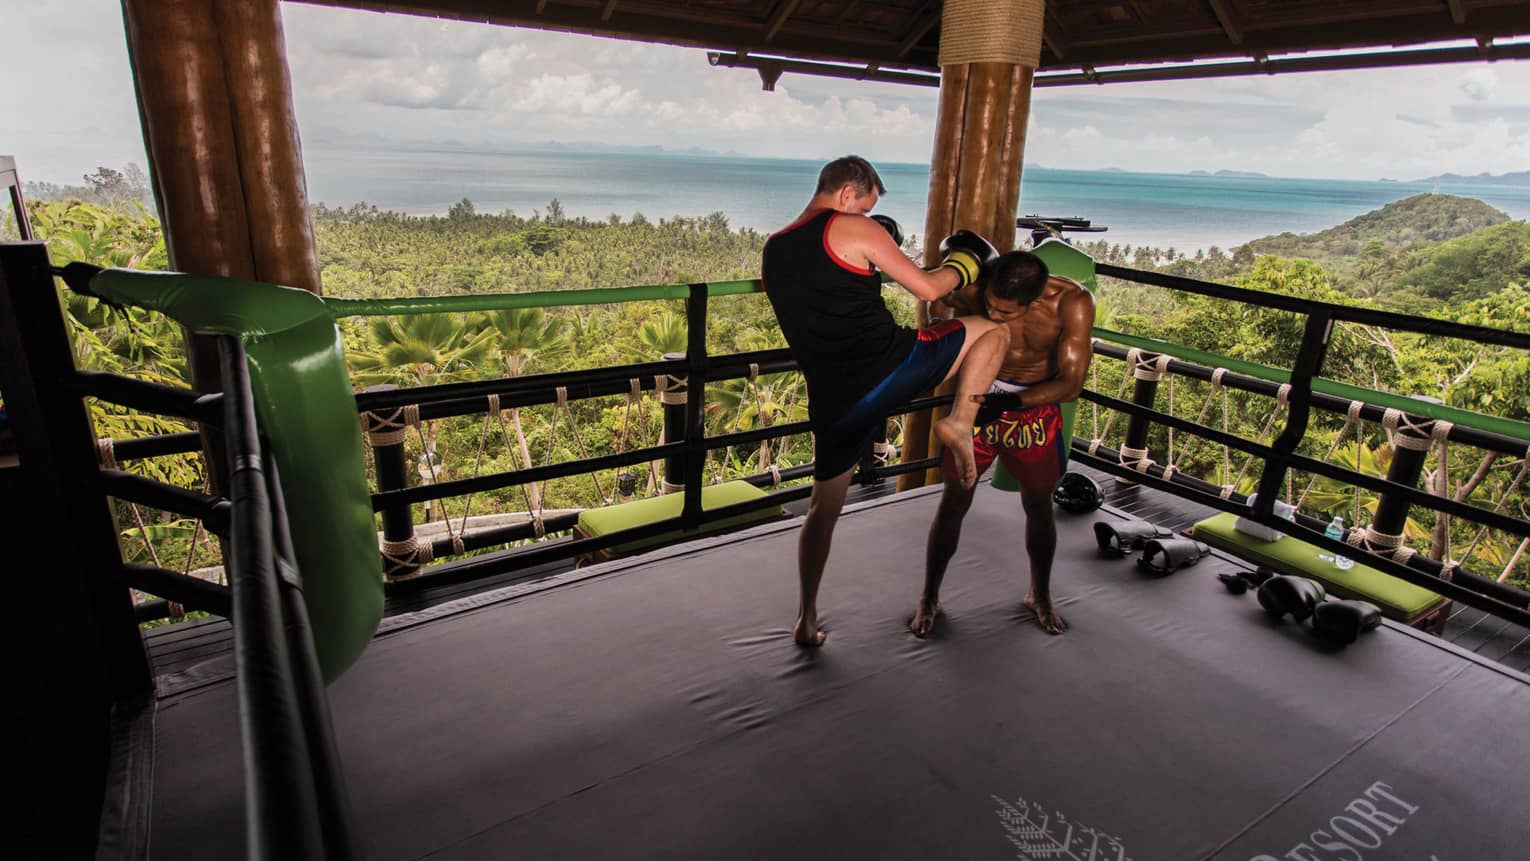 Two boxers, one's knee on the other's chest, on a padded floor against a backdrop of lush jungle and serene ocean.